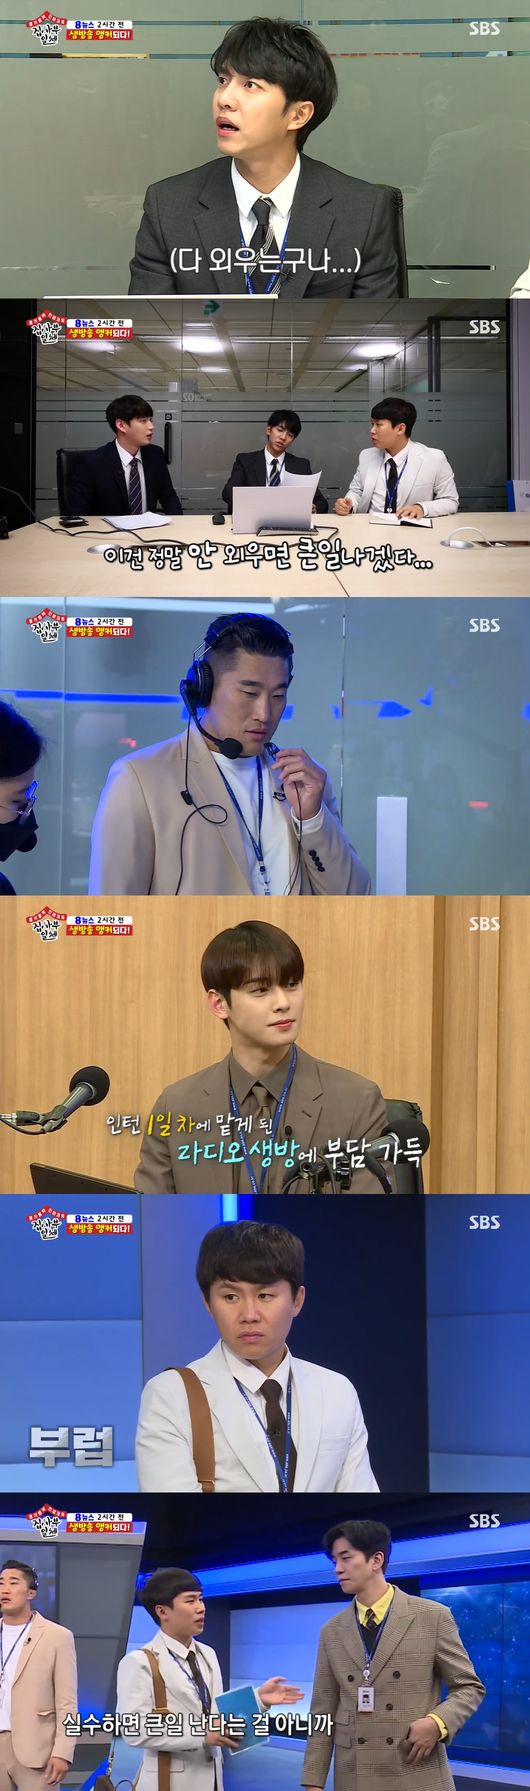 Cha Eun-woo and Lee Seung-gi were recruited as finalists, with All The Butlers Lee Seung-gi, Shin Sung-rok, Yang Se-hyeong, Cha Eun-woo and Kim Dong-Hyun being Top Model on SBS Super Rookie.On SBS All The Butlers broadcast on the afternoon of the 26th, Lee Seung-gi, who is ahead of SBS 8 news live anchor debut, was drawn.Kim Dong-Hyun was a daily assistant, Shin Sung-rok was a CG team, and Cha Eun-woo was a top model for radio broadcasts.Cha Eun-woo boasted a loud pronunciation and extraordinary vocalization as he radioed Re-Ment, which was translated by President Trumps English language speech.Lee Seung-gi said, Why do you like your voice so much? And Kim Yoon-sang, an announcer, said, I was surprised. Radio news is hard for announcers.But Cha Eun-woo has a perfect diction and voice. Lee Seung-gi, who became a daily announcer for sports news closing Re-Ment, also finished live news safely with praise from senior announcers.Then, All The Butlers Lee Seung-gi, Shin Sung-rok, Yang Se-hyeong, Cha Eun-woo and Kim Dong-Hyun were Top Model in the editorial mission ahead of the final interview with the entertainment director, the final stage of the SBS Super Rookie interview.All The Butlers participated in the opening video editing.First, Cha Eun-woo continued his speedy editing techniques and thoroughly self-centered cuts, saying from Yang Se-hyeong, Im talking?This is not All The Butlers, received a pinjam: Shin Sung-rok also said, Is it a Cha Eun-woo direct cam?, Kim Dong-Hyun said, When do I come out? All The Butlers Lee Seung-gi presented the editing of the Devil.When asked if he would like to perform, Cha Eun-woos broadcast amount, which he answered, I want to continue, was put after the question How about All The Butlers?All The Butlers CP said, I looked at X-Men 17 years ago, so I wondered what kind of editing Lee Seung-gi wanted.I felt that if we came out of Lee Seung-gi, we could do what we want. Kim Dong-Hyun was the first to edit all of the 50-minute front-end situations and put his own volume first, especially with excessive slow techniques.The slow is so long, its not breathing, Yang Se-hyeong and Shin Sung-rok said.The second final interview task is Submit the master directly.Lee Seung-gi, Shin Sung-rok, Yang Se-hyeong, Cha Eun-woo, Kim Dong-Hyun, who came to the masters office directly.They heard the last mission of Sambu-su and mobilized their personal connections.Shin Sung-rok, who first came to Top Model, saying hands tremble, called Han Ji-min, who said, Can you talk for a minute?, in the words of Shin Sung-rok, Wait, what, I thought you were drunk.Also, Han Ji-min, in an offer to invite Master, said, What Master? Youre making a lot of sense. Youre really good at broadcasting. Ill text you.Call me after youre done, he said.Cha Eun-woo said, I have never contacted you in private, so I did not have a contact information personally.I feel sorry, he said, calling You Hee-yeol. But you Hee-yeol told me that he was on his first phone.I was thinking, it wasnt rude, he said.Especially, You Hee-yeol laughed at Cha Eun-woos words, Where are you now? And said, Are you coming now? Jung Eun-woo is very aggressive.It is not a suitable term for broadcasting, but it is a stone + child. There was this side. In addition, you Hee-yeol said in a somewhat embarrassed voice, What kind of girl is Jung Eun-woo? Im scared. You almost made an appointment.I almost passed it, he said. I am not confident that I will do well.If I can meet next time, it will not be bad to meet and talk later. All The Butlers Yang Se-hyeong said, I will contact Baek Jong-won, who tells me about the food that accounts for more than 80% of the happiness in life.Baek Jong-won said, Its a good idea. Lets try to think about it and talk.Kim Dong-Hyun promised to star as Master with Ma Dong-SeokMa Dong-Seok received a definite answer from I will make something fun when it is time. Ma Dong-Seok is preparing Crime City 2 and is resting because he is not filming.Tell me anything. Anything Dong Hyun asks me to do (it is possible), and expressed a special affection for Kim Dong-Hyun.Lee Seung-gi, All The Butlers, said, I have never actually done it, and I really want you to come out.I honestly do not want to be, said Bong Joon-ho.However, when Bong Joon-hos mobile phone was turned off, Lee Seung-gi left a voice message saying, I wanted to contact you once.Finally, the final successful candidate for SBS Super Rookie became Cha Eun-woo; Lee Seung-gi was hired as the director of SBS career PD.Cha Eun-woo said, I will be the youngest to grow like a seasoned senior.On the other hand, SBS All The Butlers is a life tutoring program for young people full of question marks and my way geek masters. It is broadcast every Sunday at 6:25 pm.SBS All The Butlers captures broadcast screen